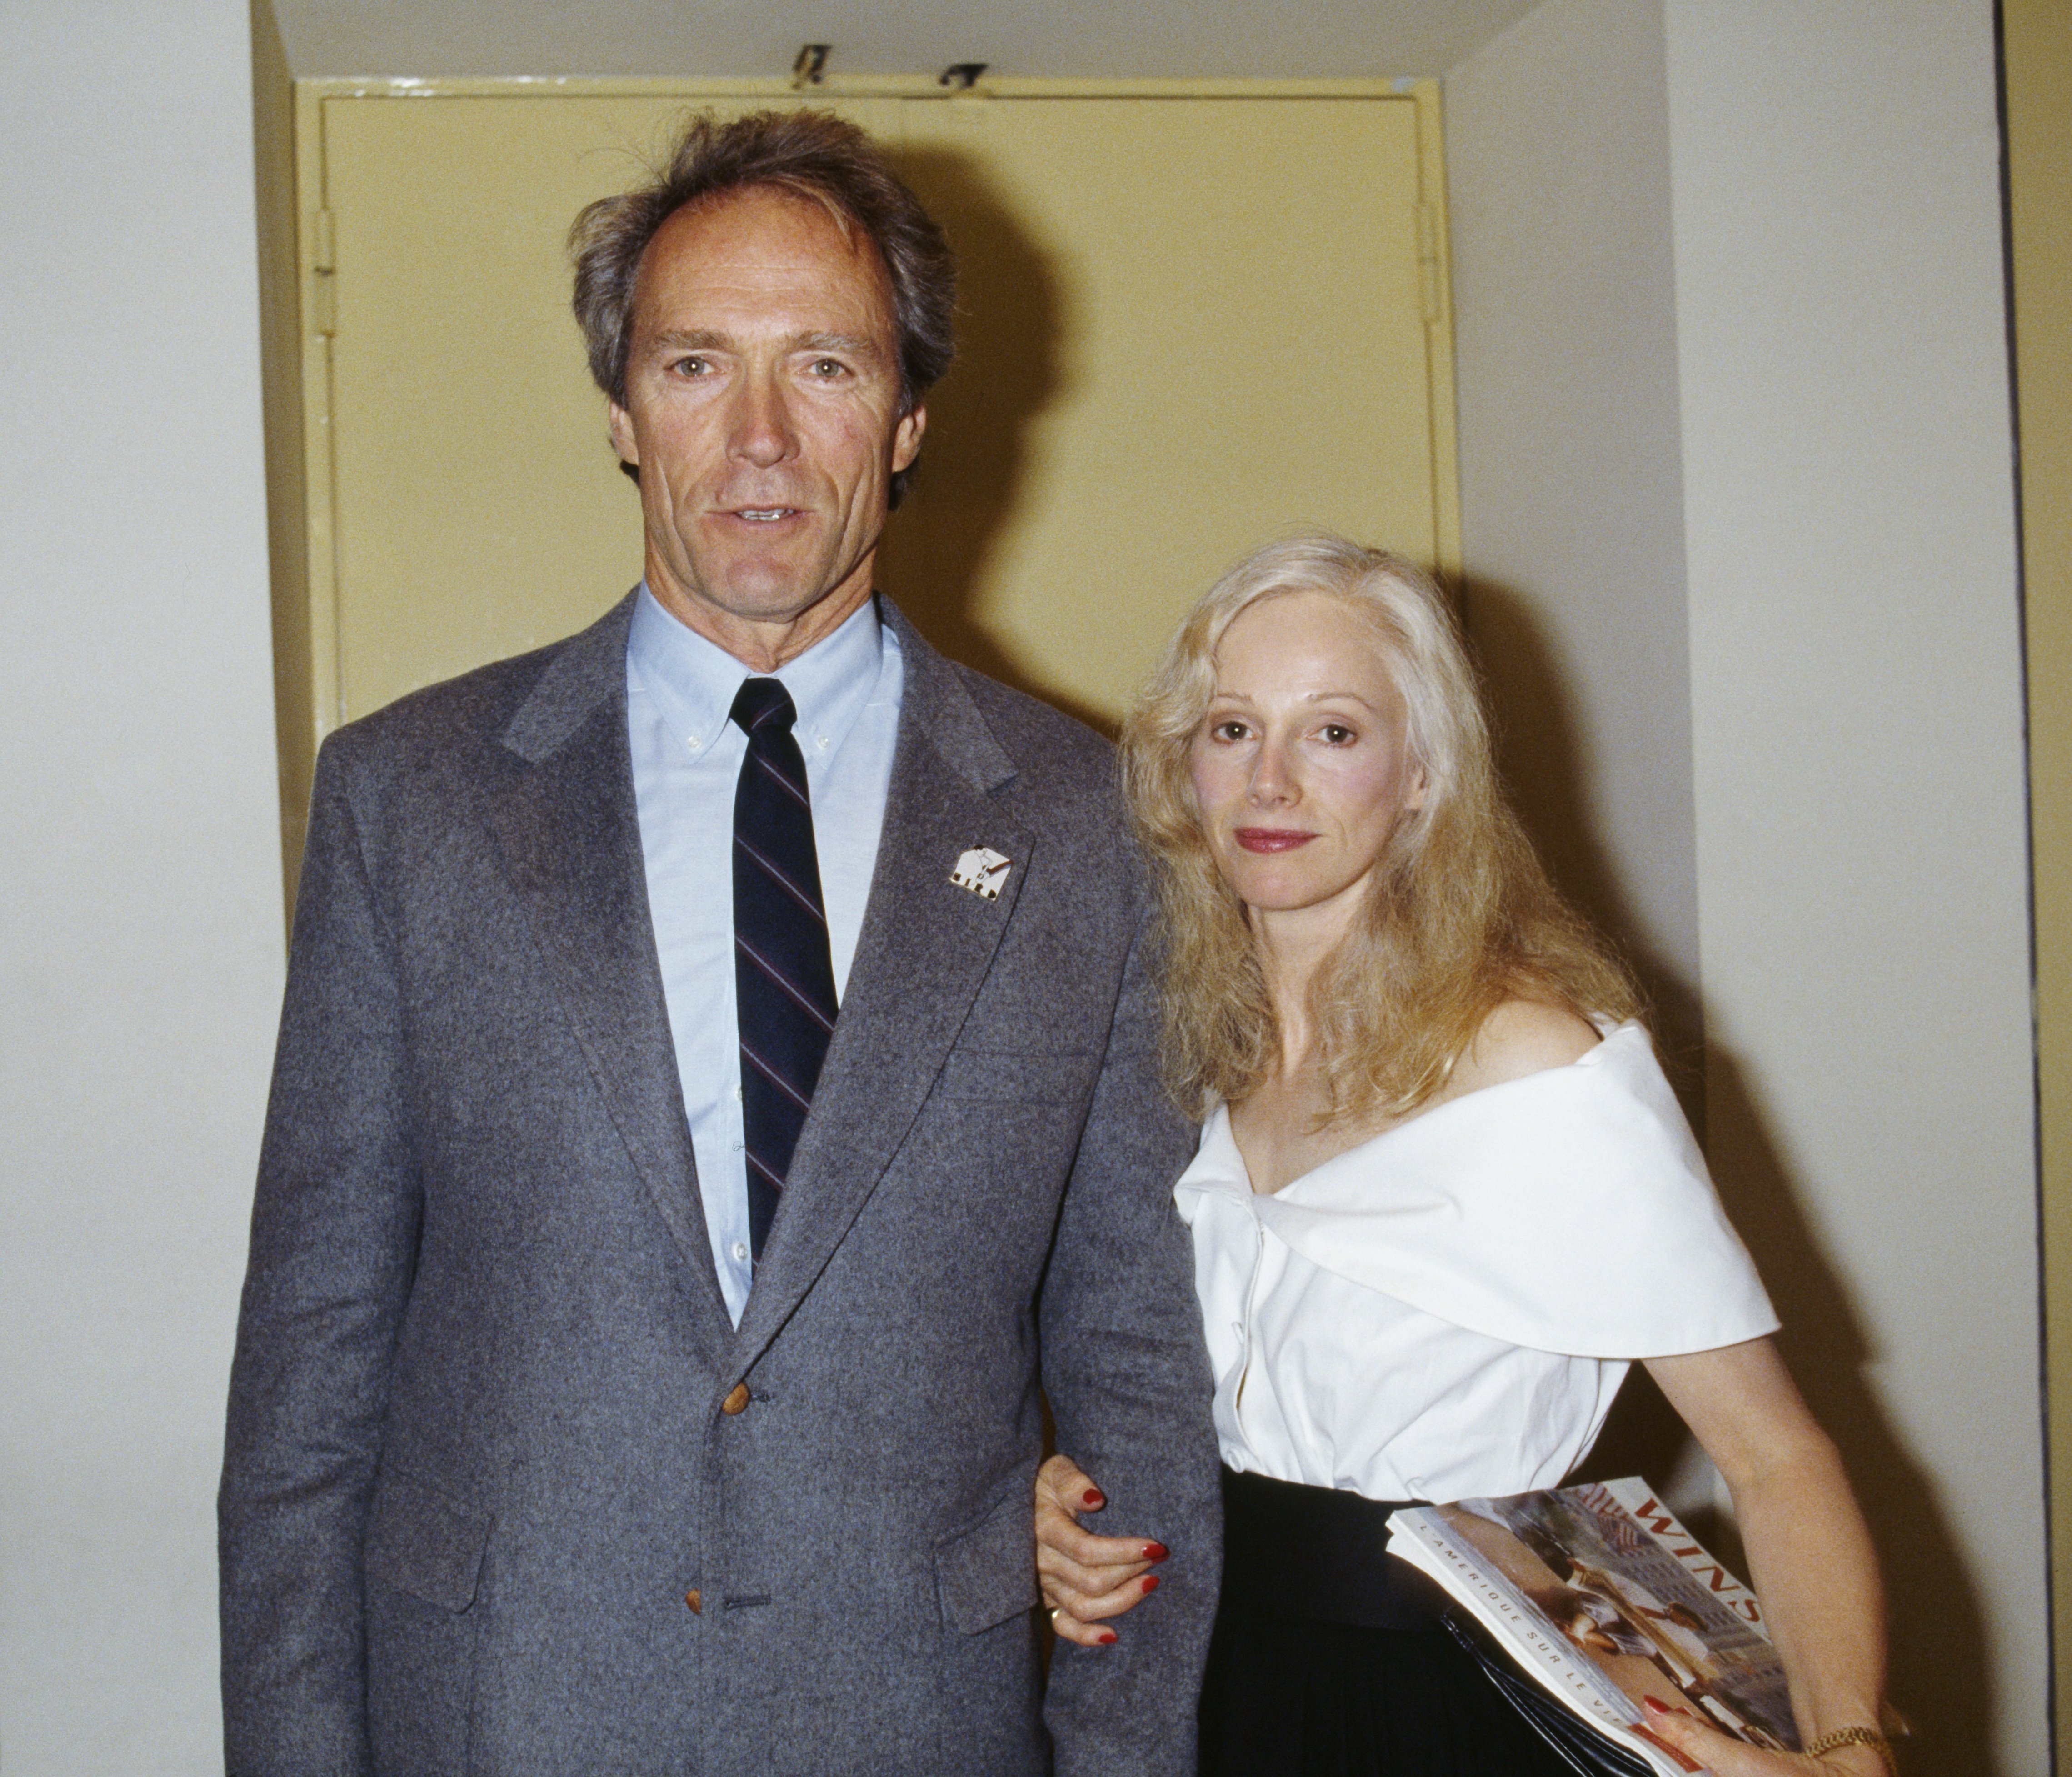 Clint Eastwood and Sondra Locke attend the premiere of his movie "Bird", a biography of jazz musician Charlie Parker, at the Cinémathèque de Paris, on May 24, 1988. | Source: Getty Images